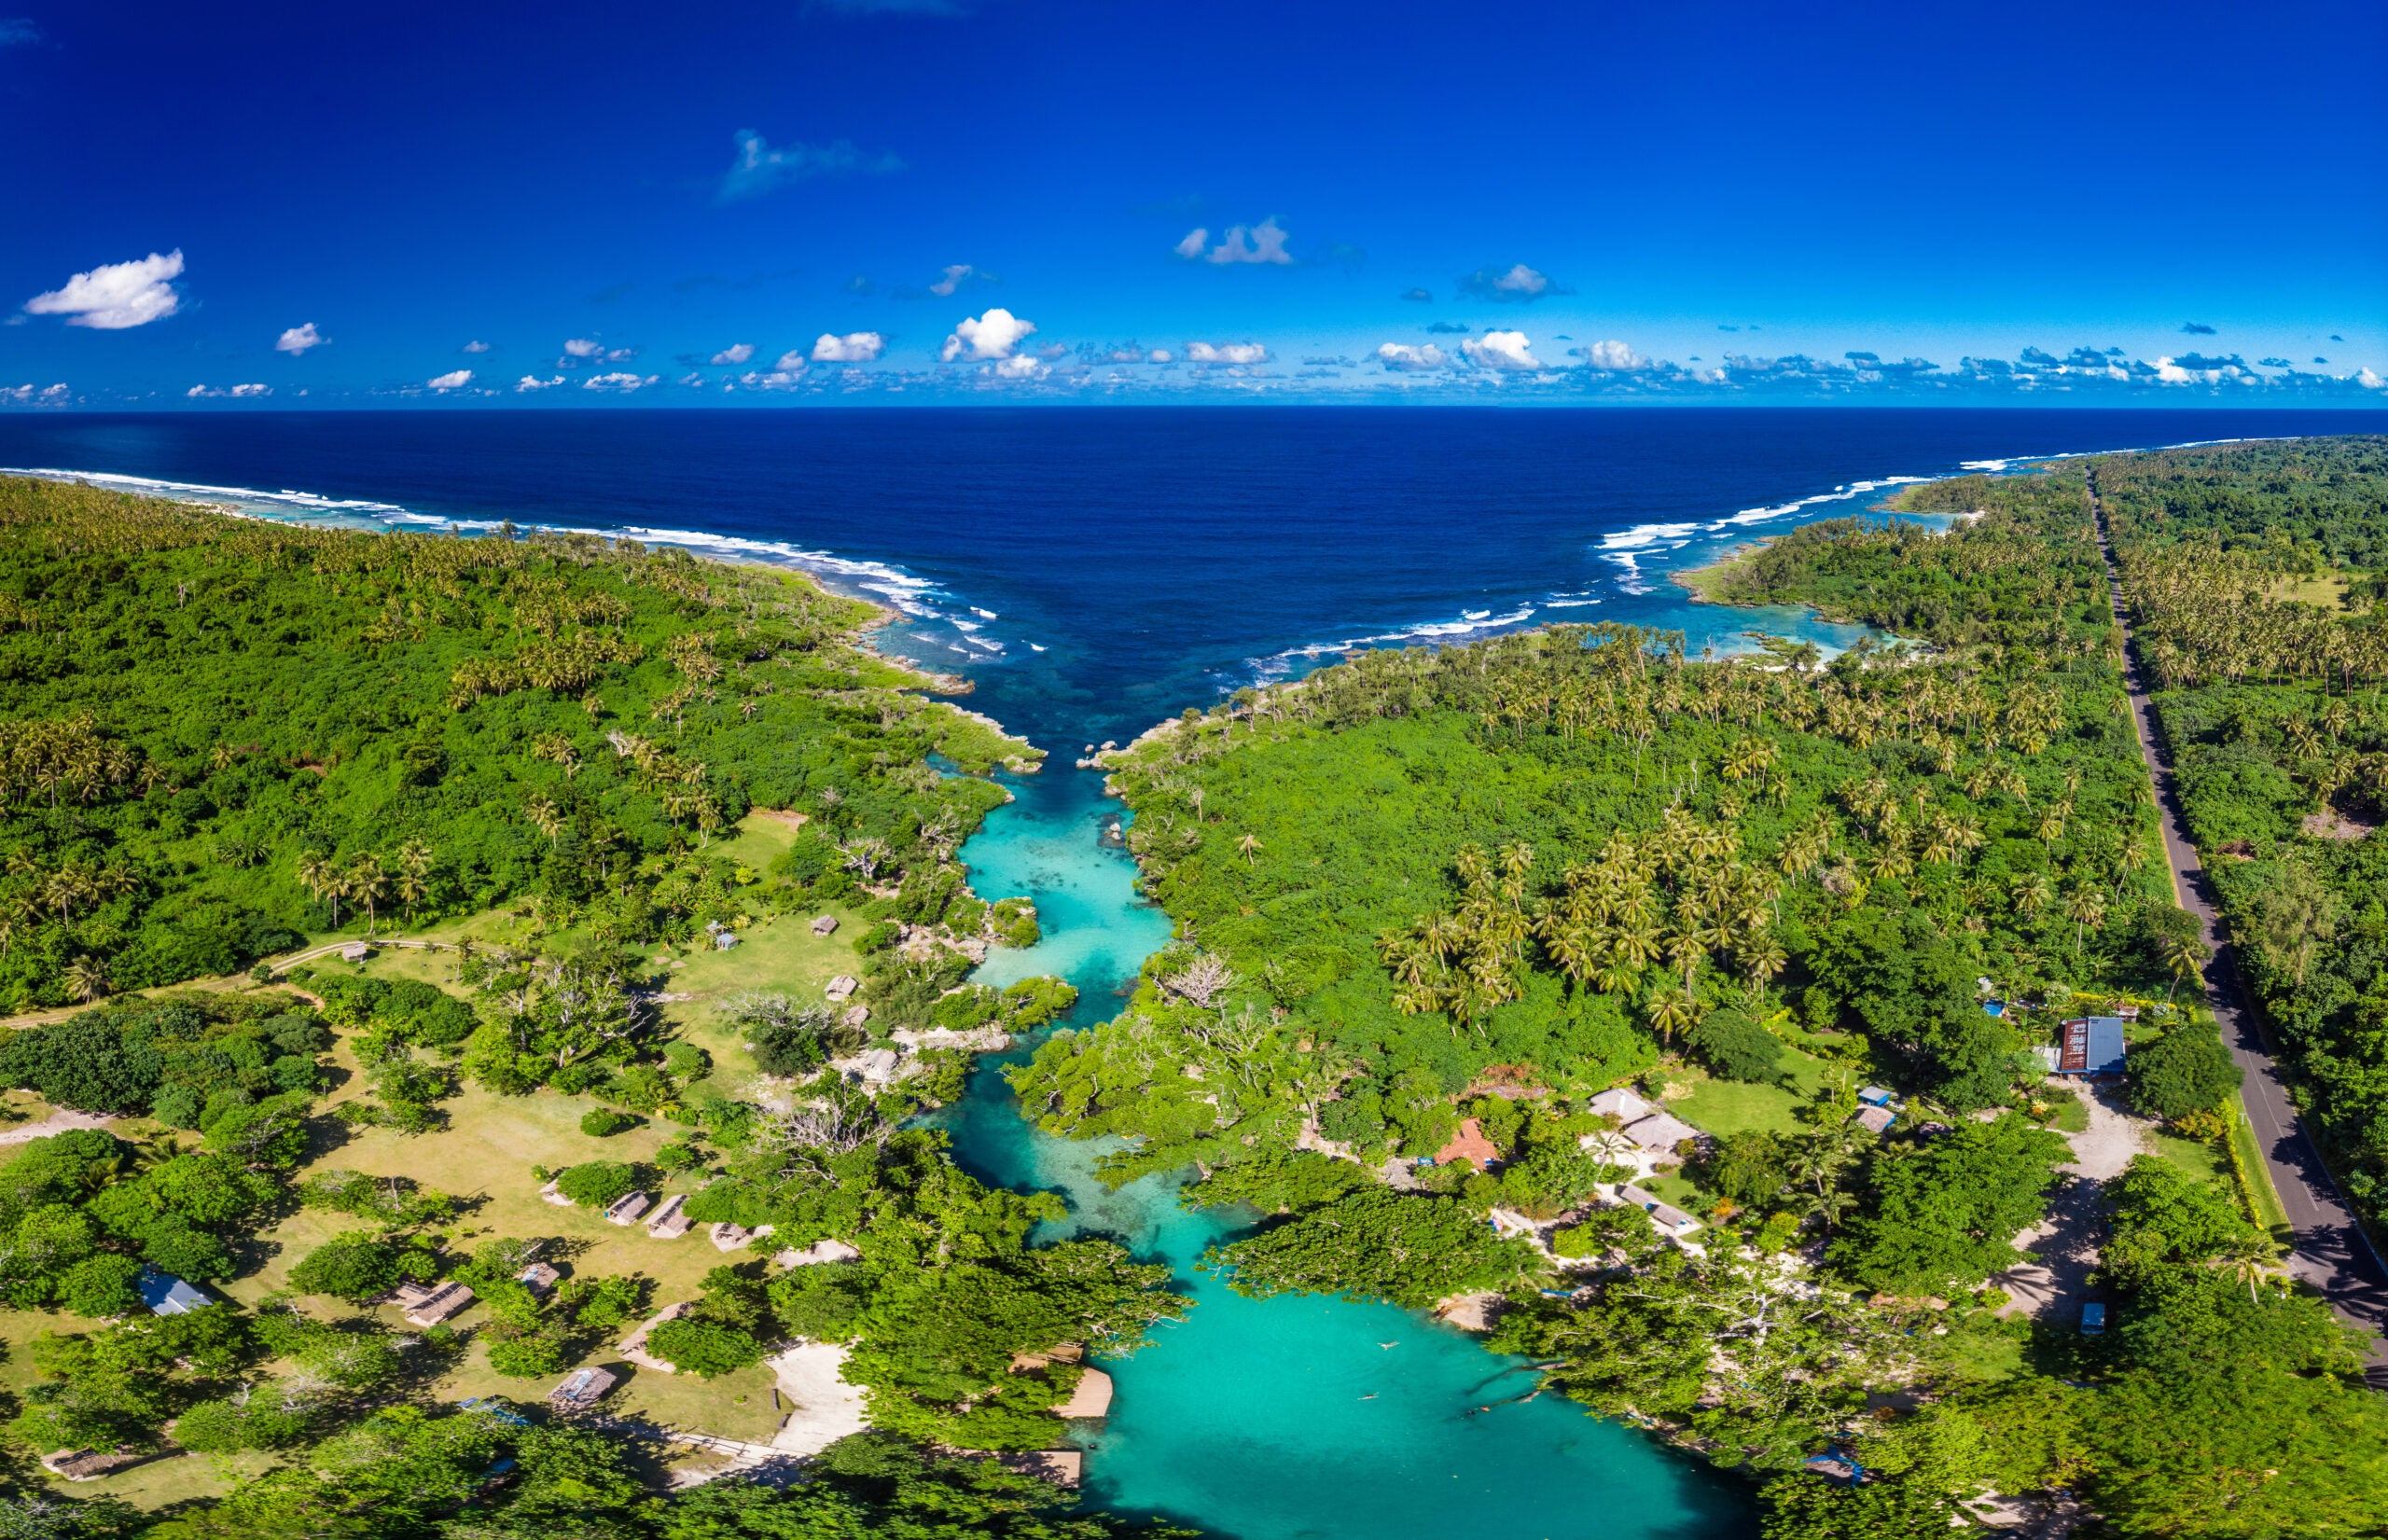 Holland America's new South Pacific itinerary will include calls in Vanuatu